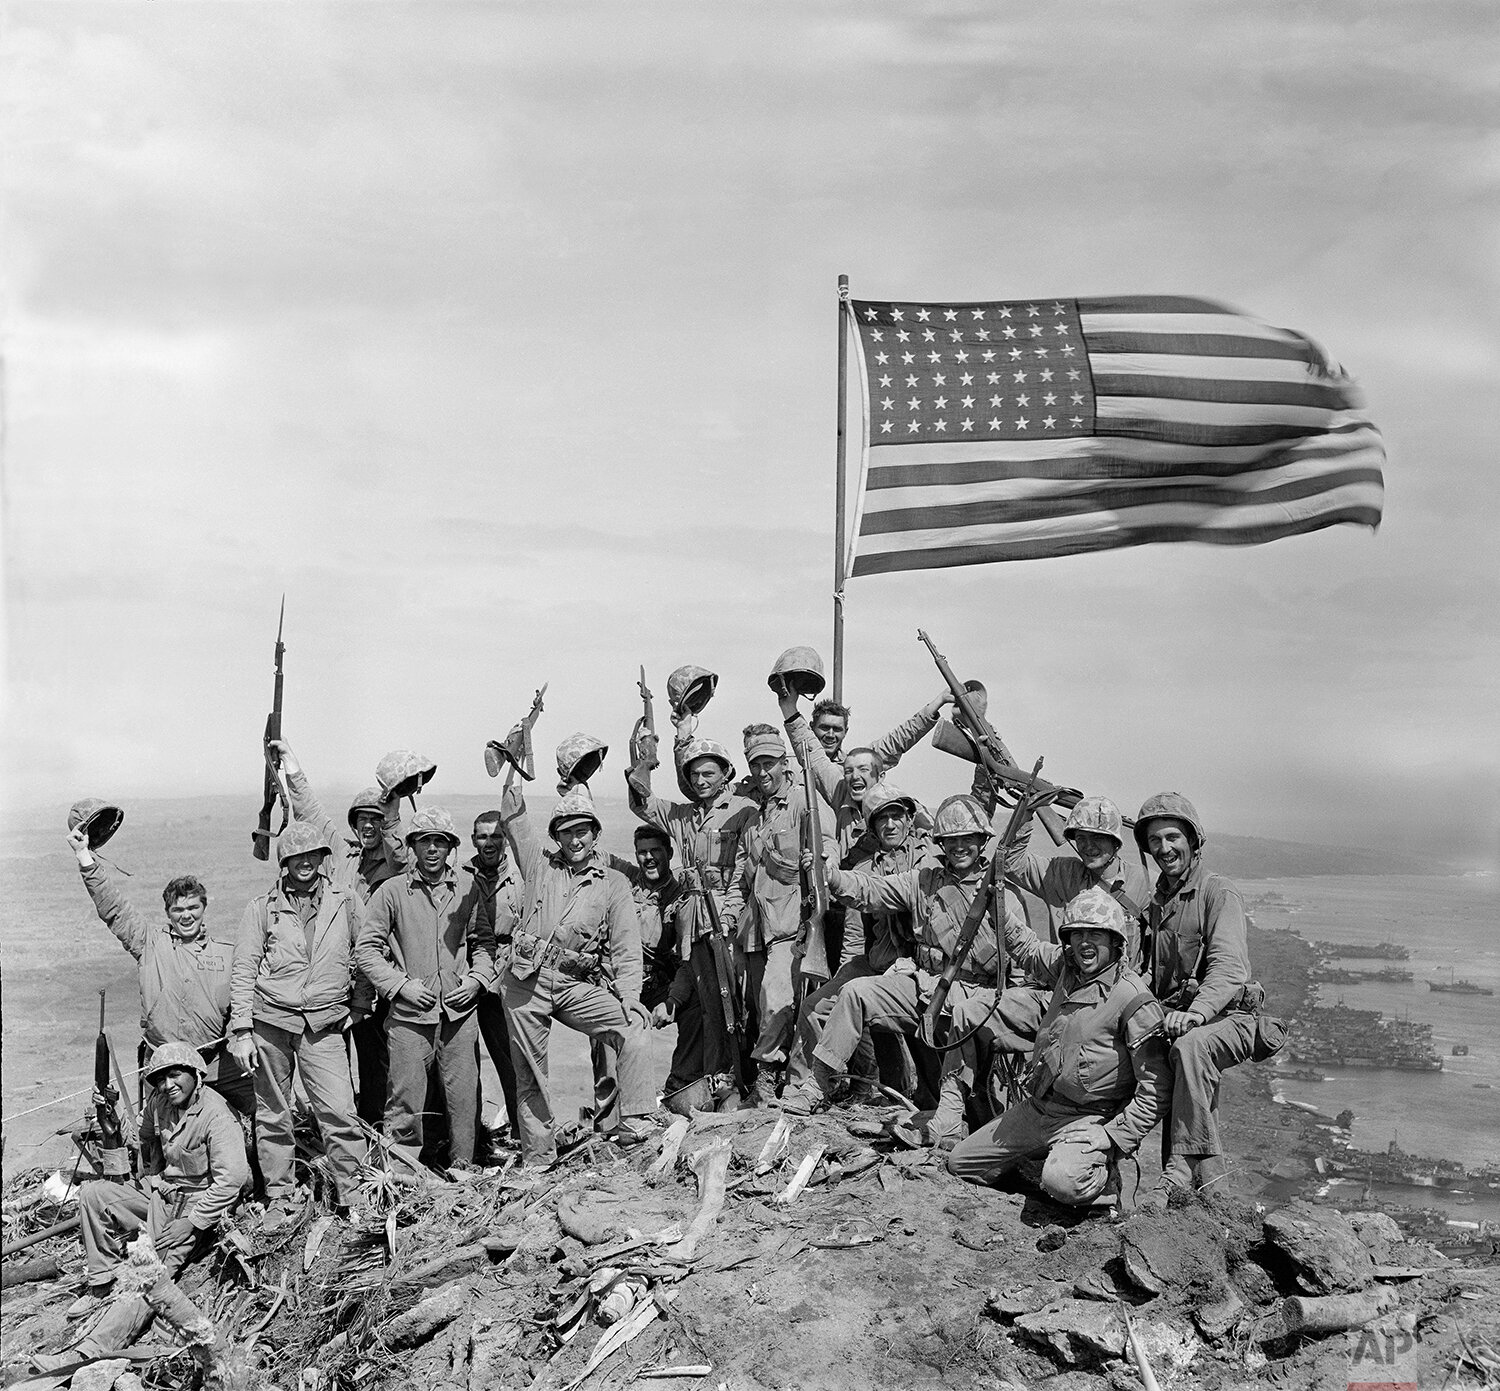  U.S. Marines of the 28th Regiment, fifth division, cheer and hold up their rifles after raising the American flag atop Mount Suribachi on Iwo Jima, a volcanic Japanese island, on Feb. 23, 1945 during World War II.  (AP Photo/Joe Rosenthal) 